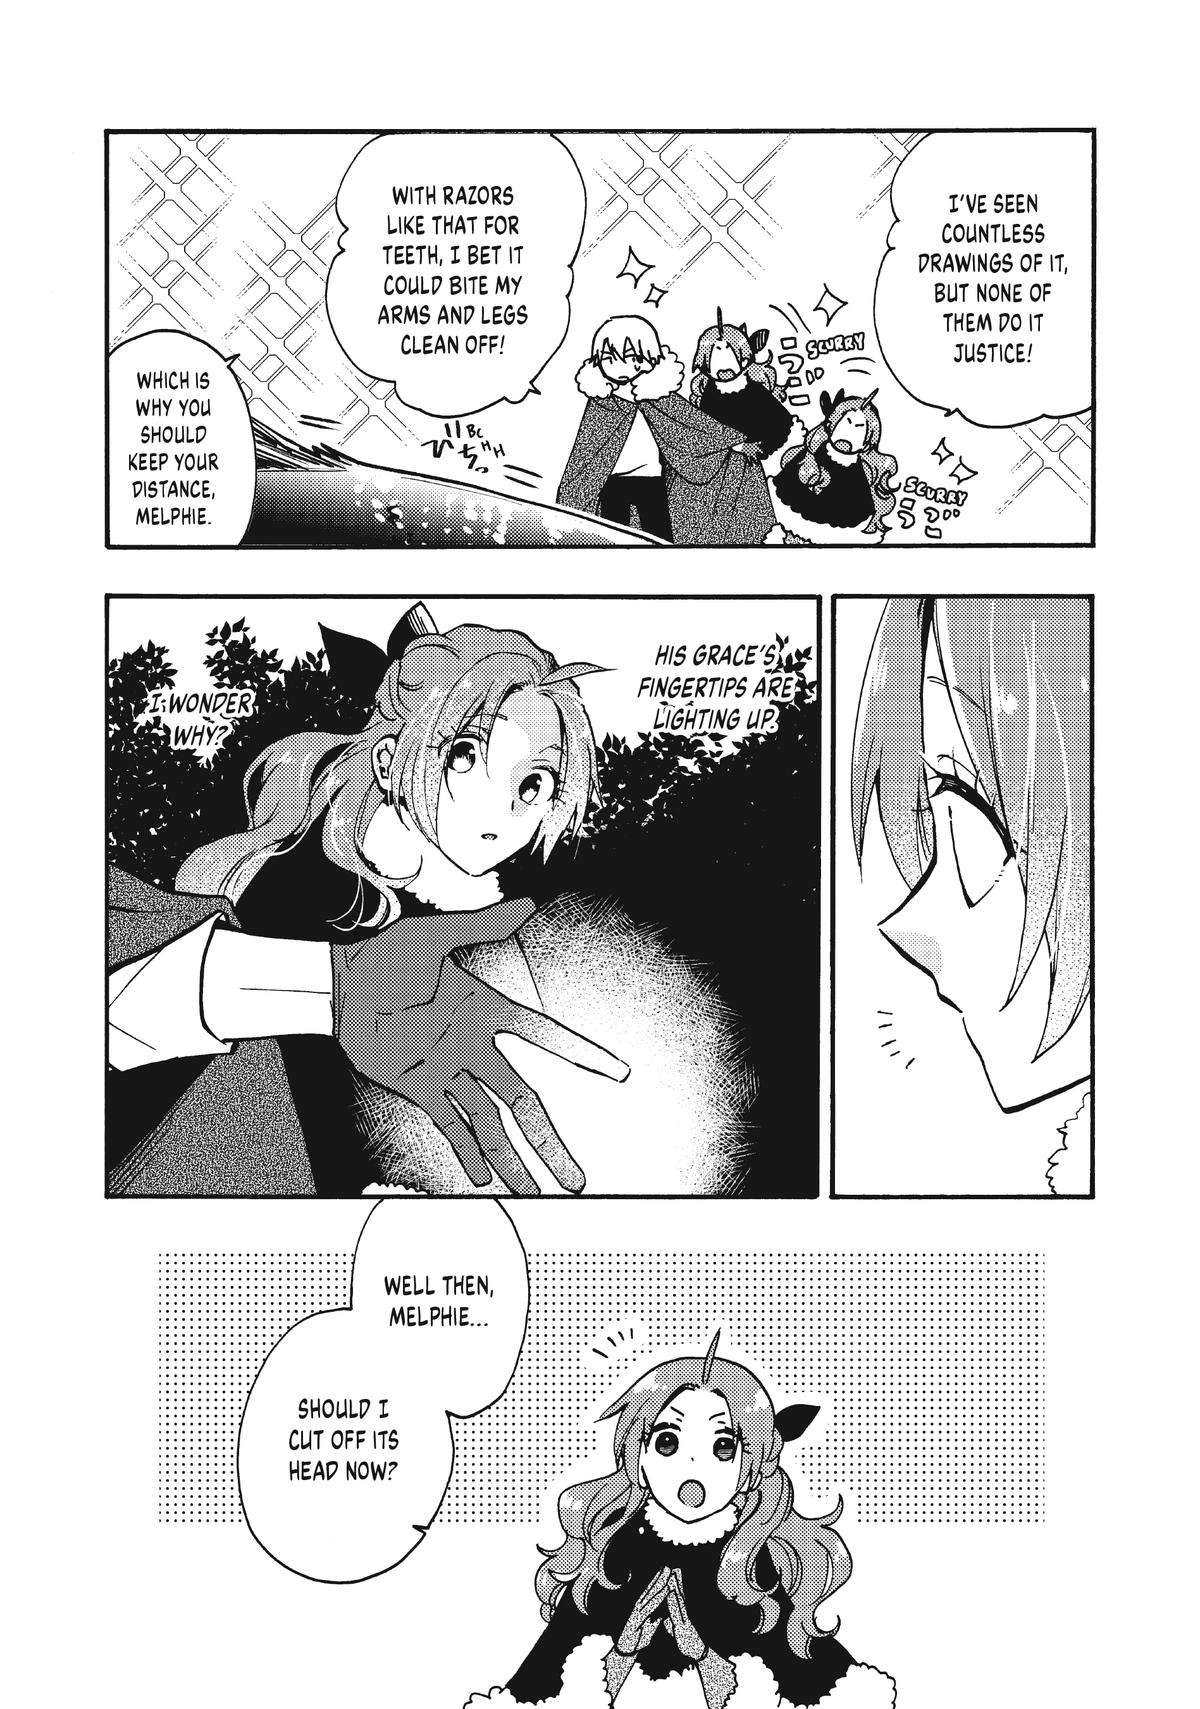 Pass the Monster Meat, Milady! - chapter 13 - #2